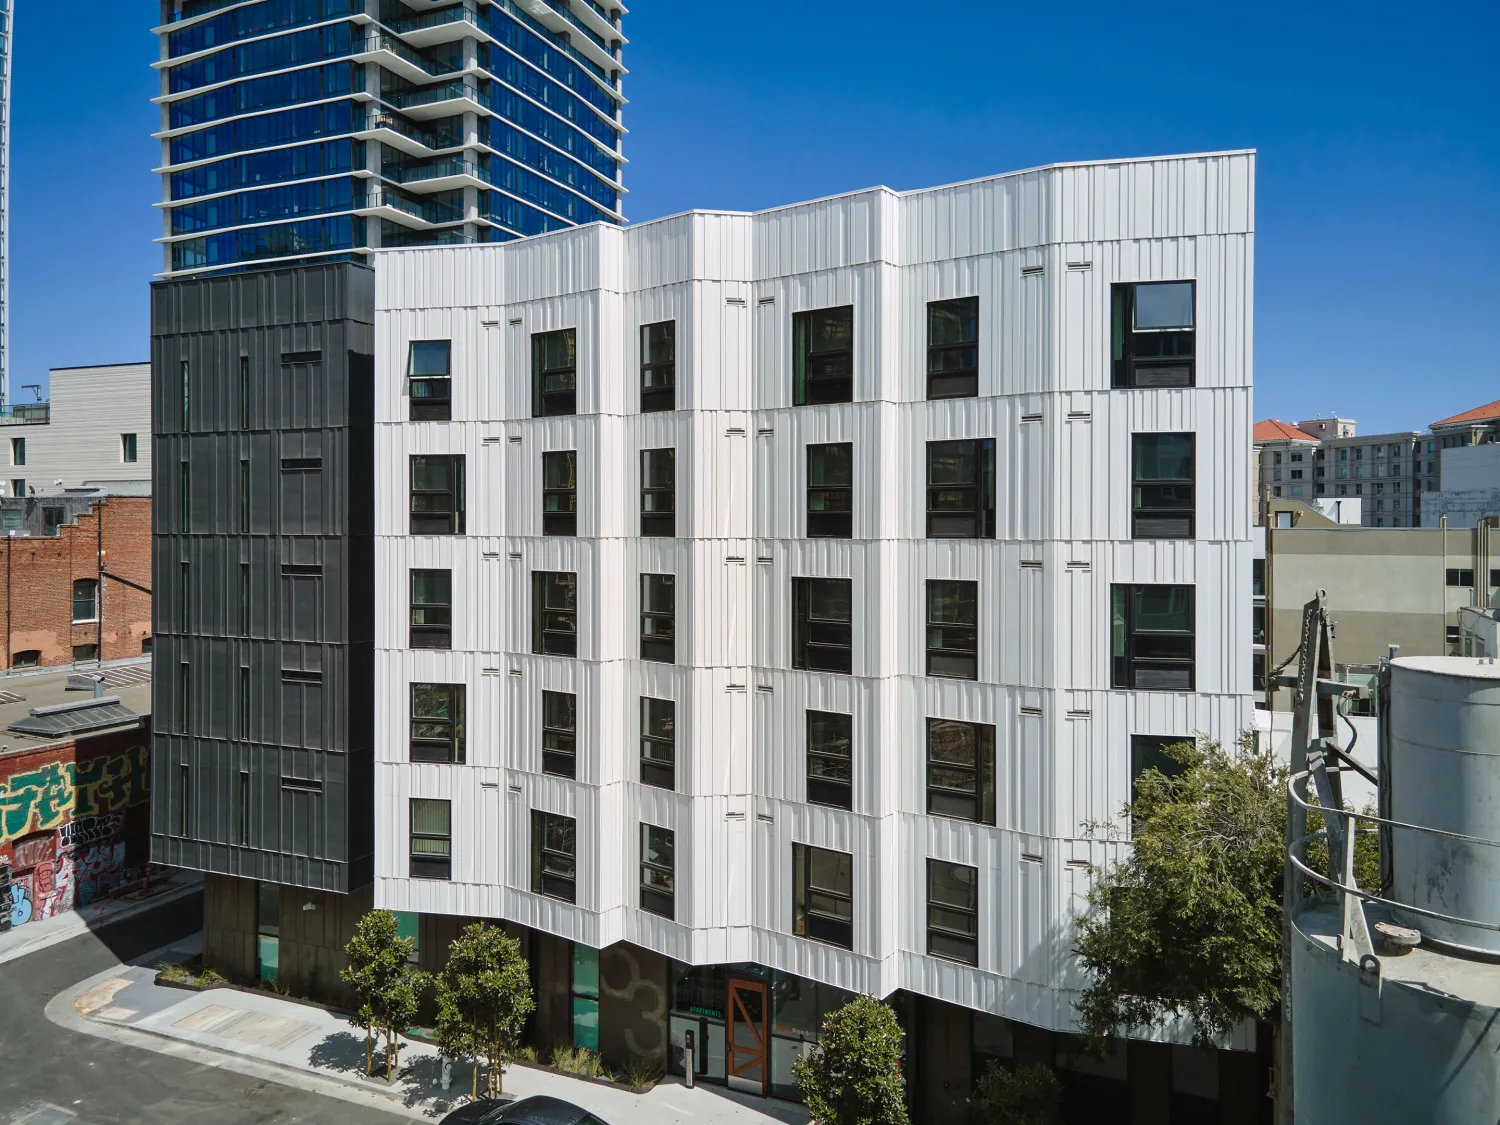 Exterior of the Jazzie Collins building, apart of the Brady Block in San Francisco.